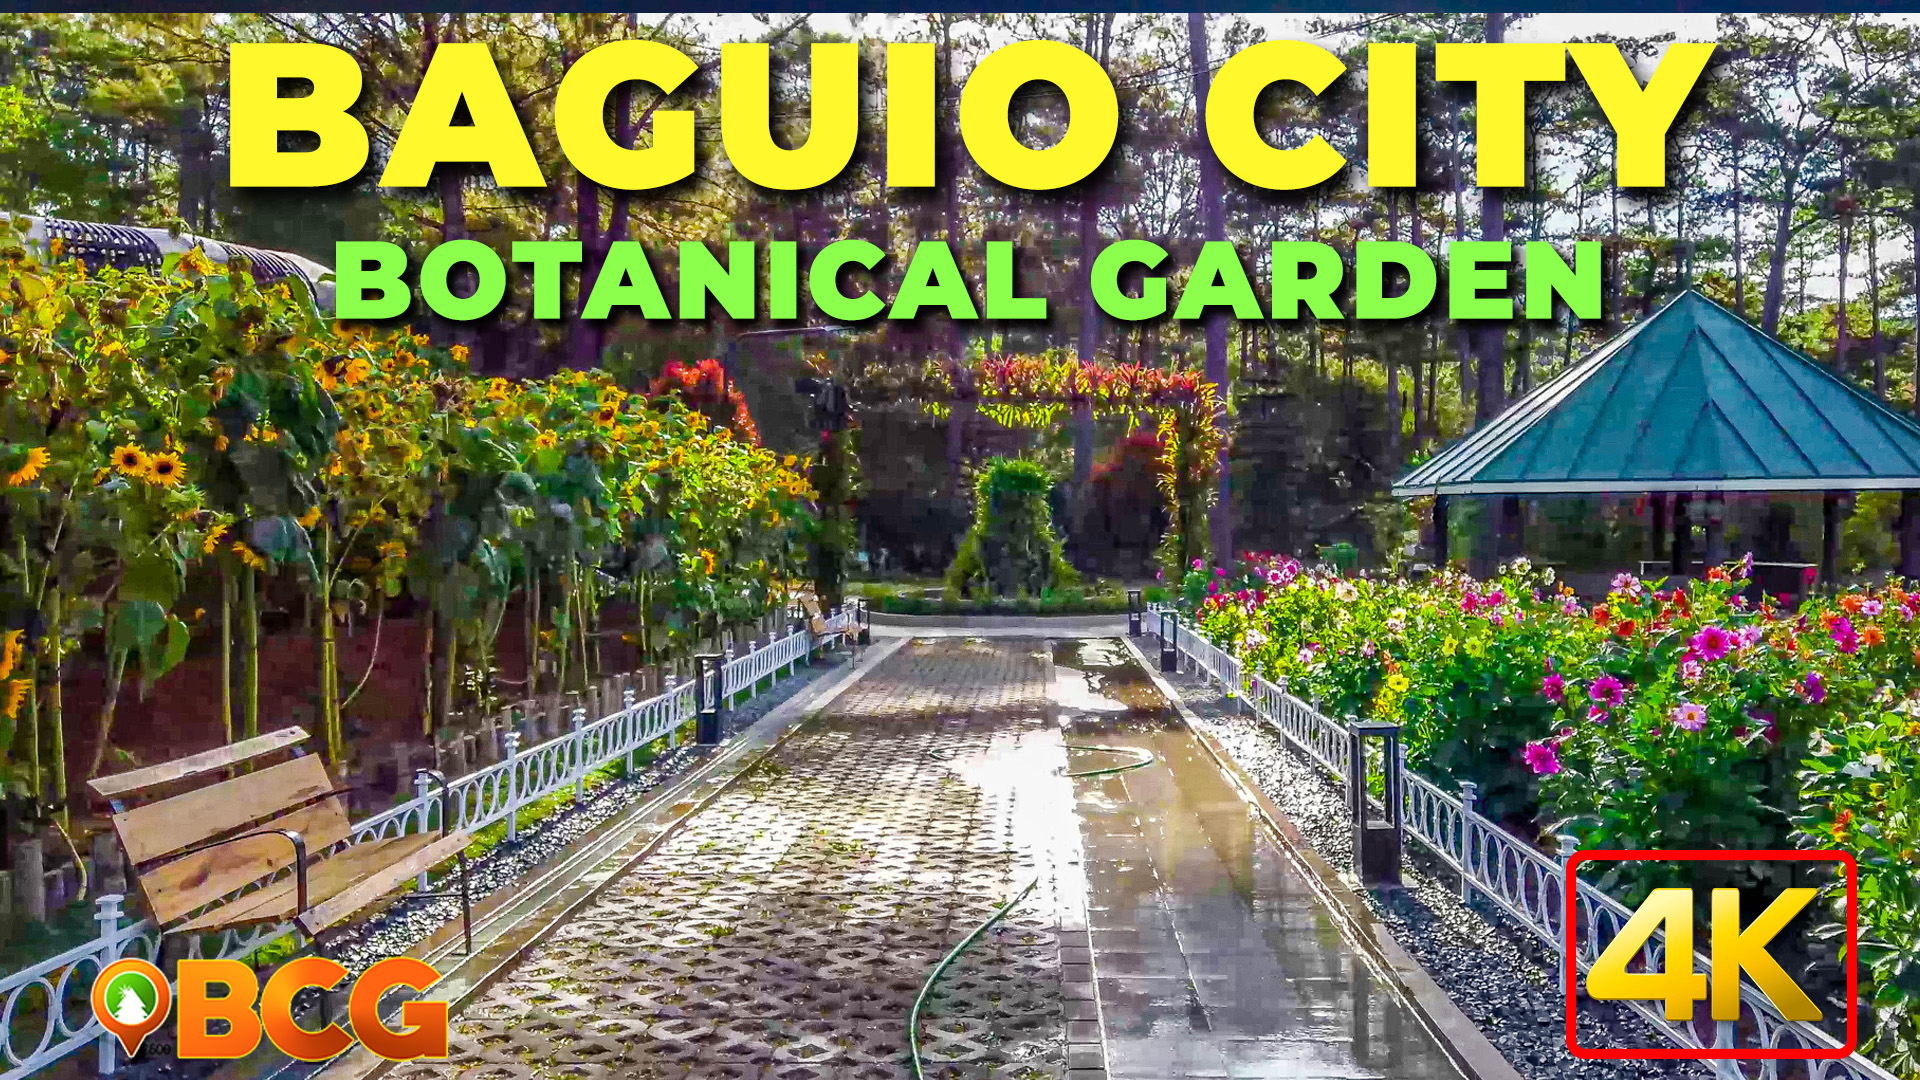 tourist spots in baguio with entrance fees